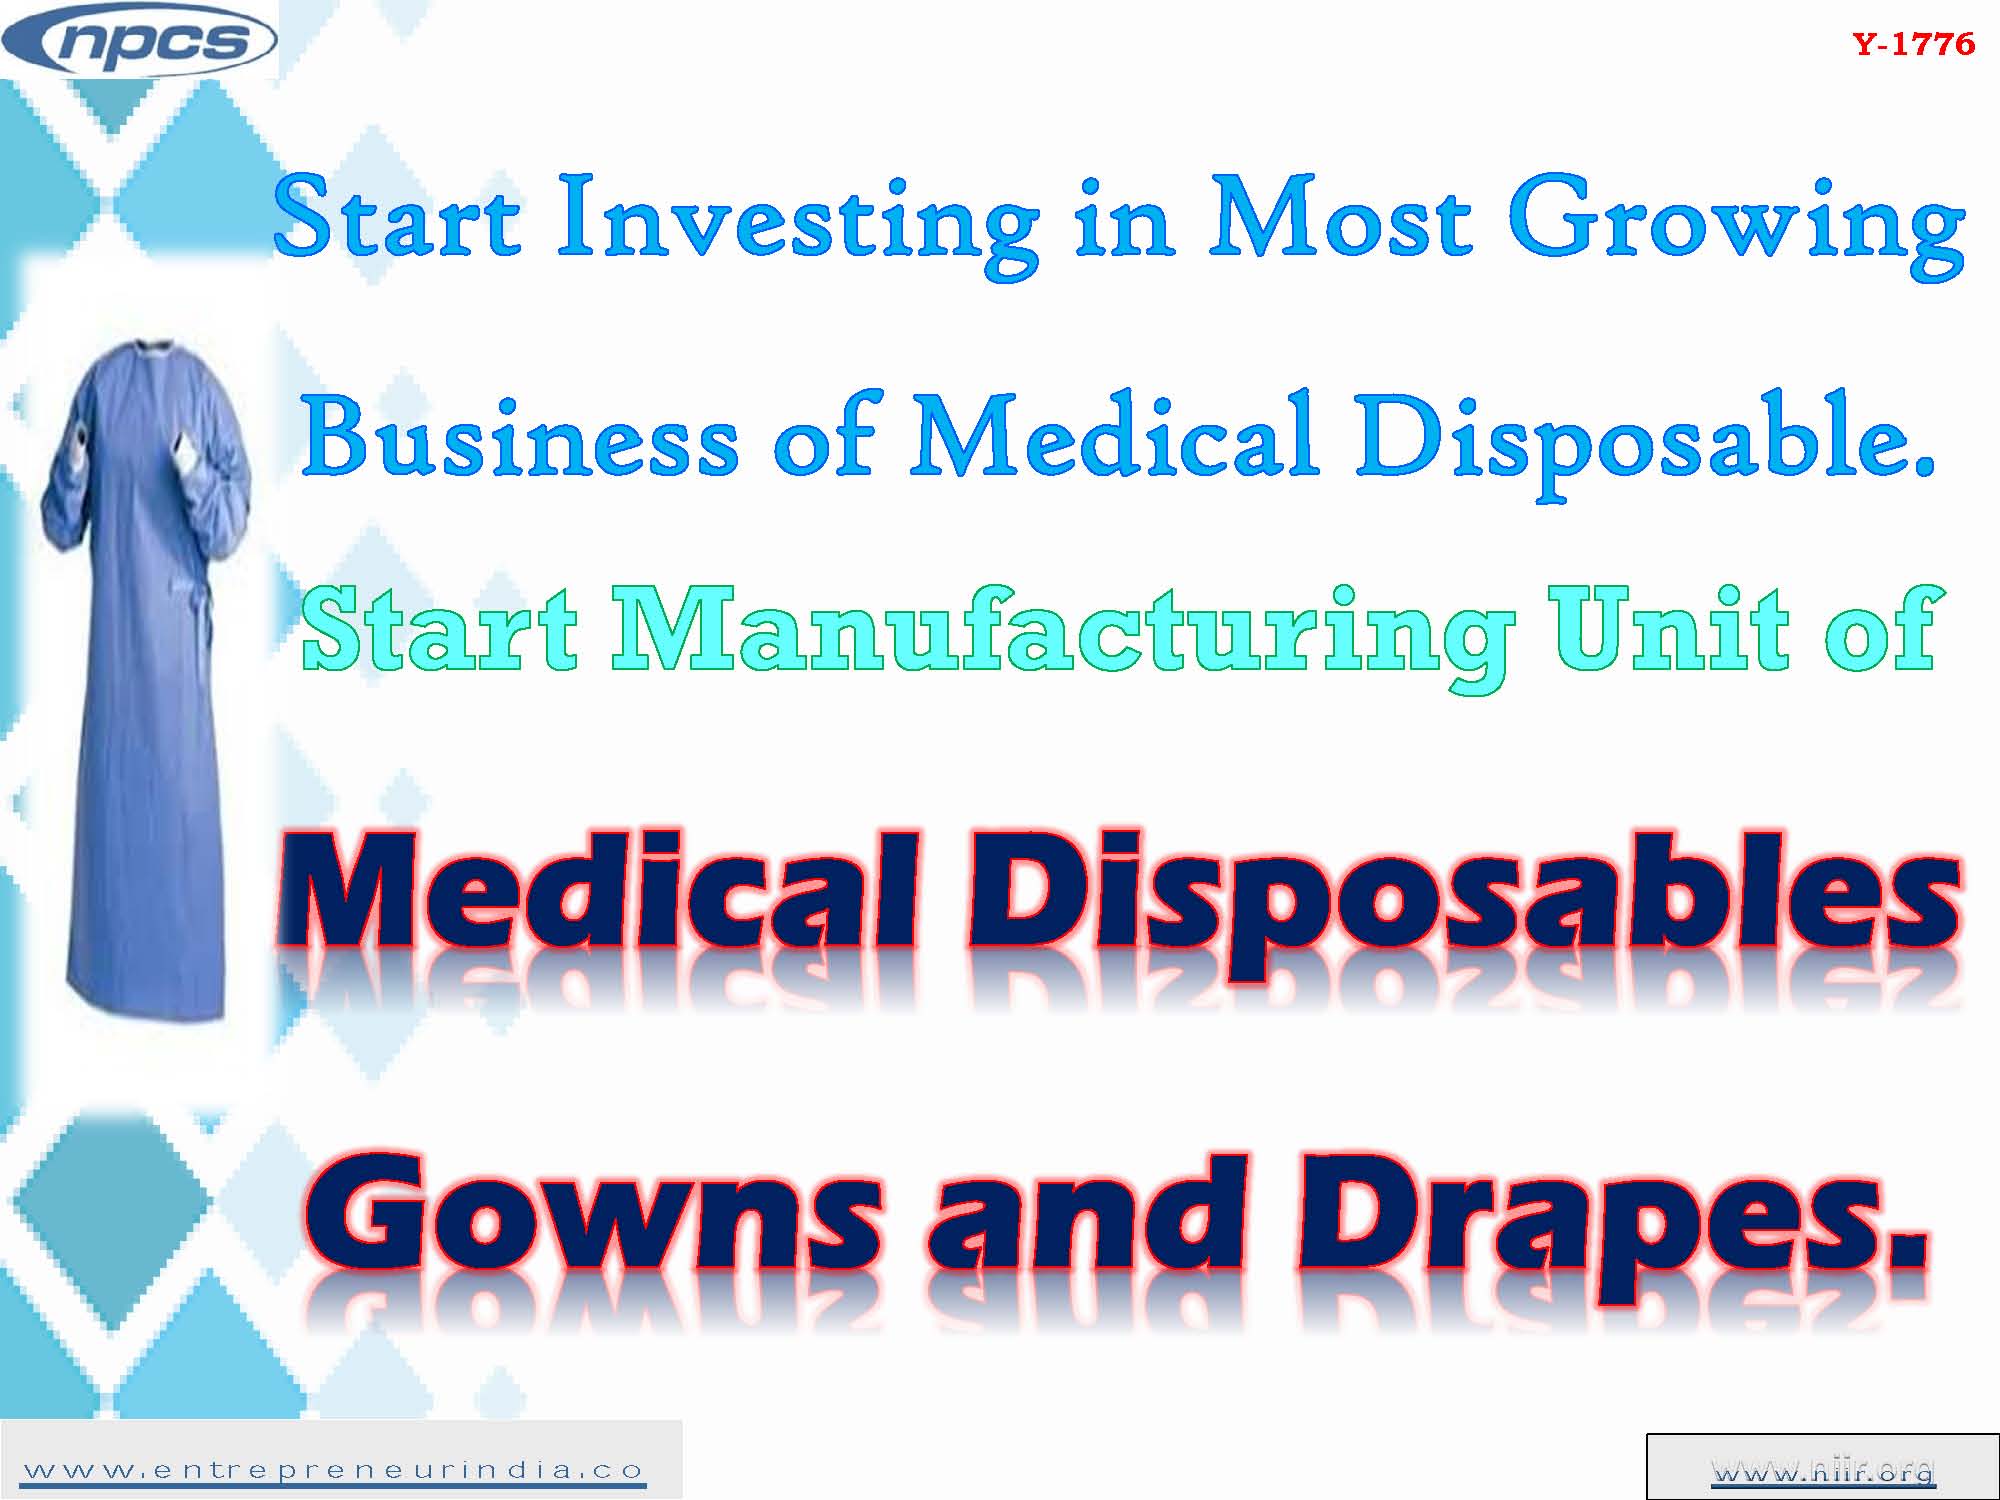 Start Investing in Most Growing Business of Medical Disposable Start Manufacturing Unit of Medical Disposables Gowns and Drapes